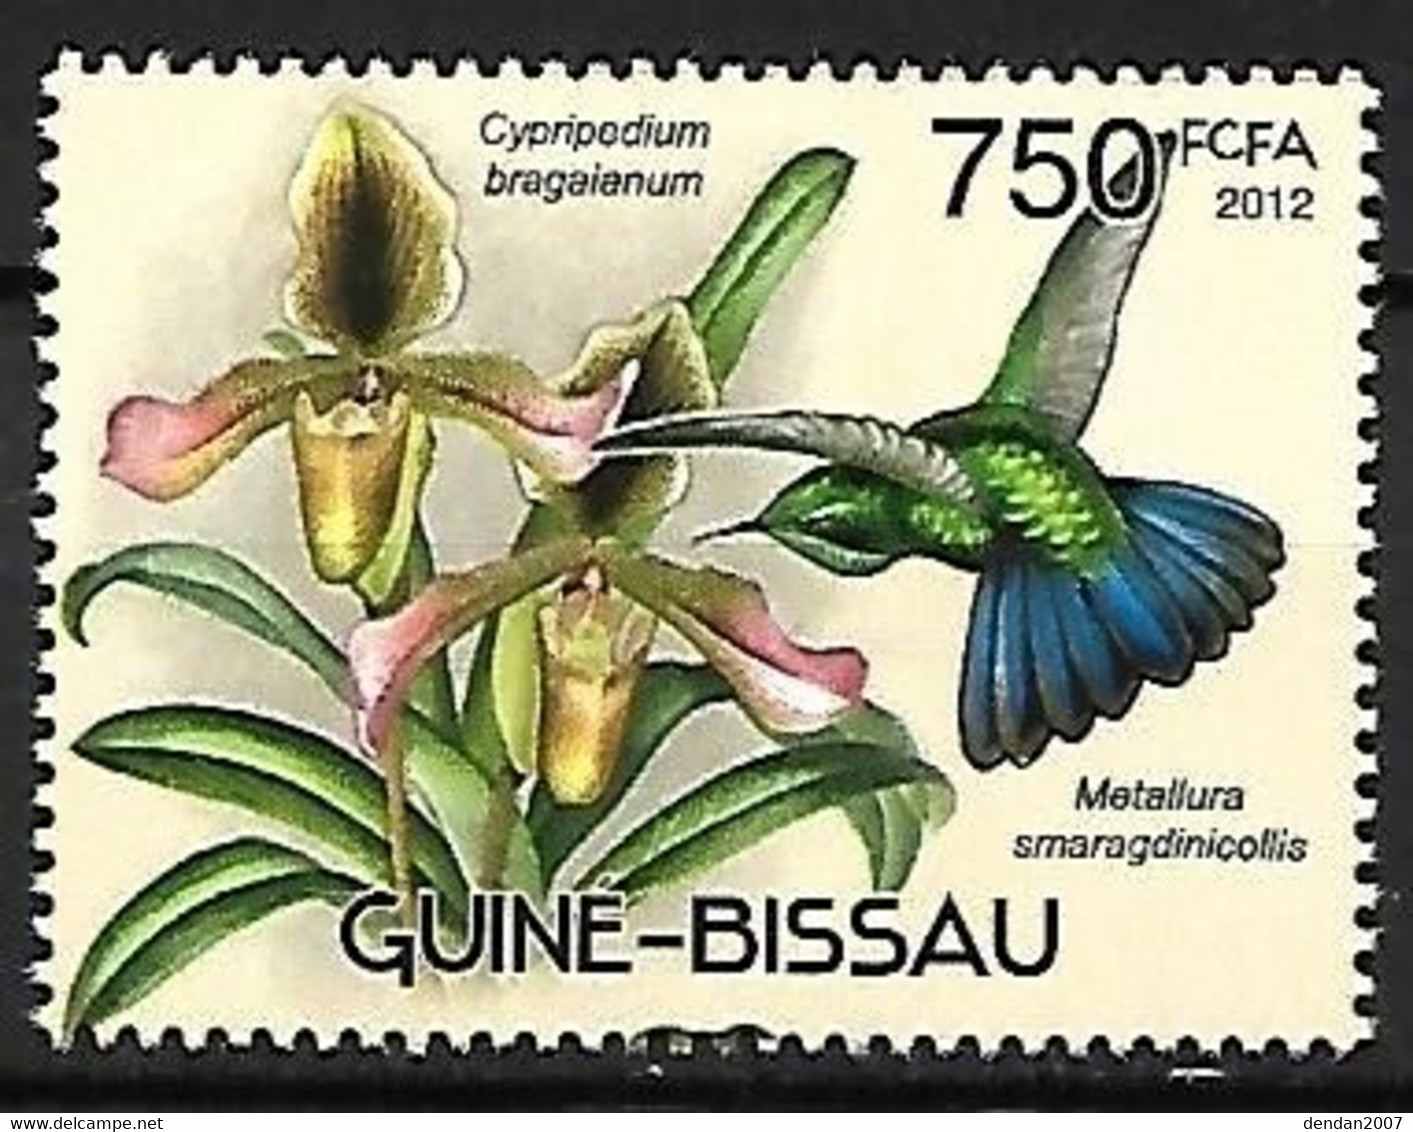 Guinea Bissau - MNH ** 2012 : Hummingbirds And Orchids : Tyrian Metaltail   - Metallura Tyrianthina - Hummingbirds